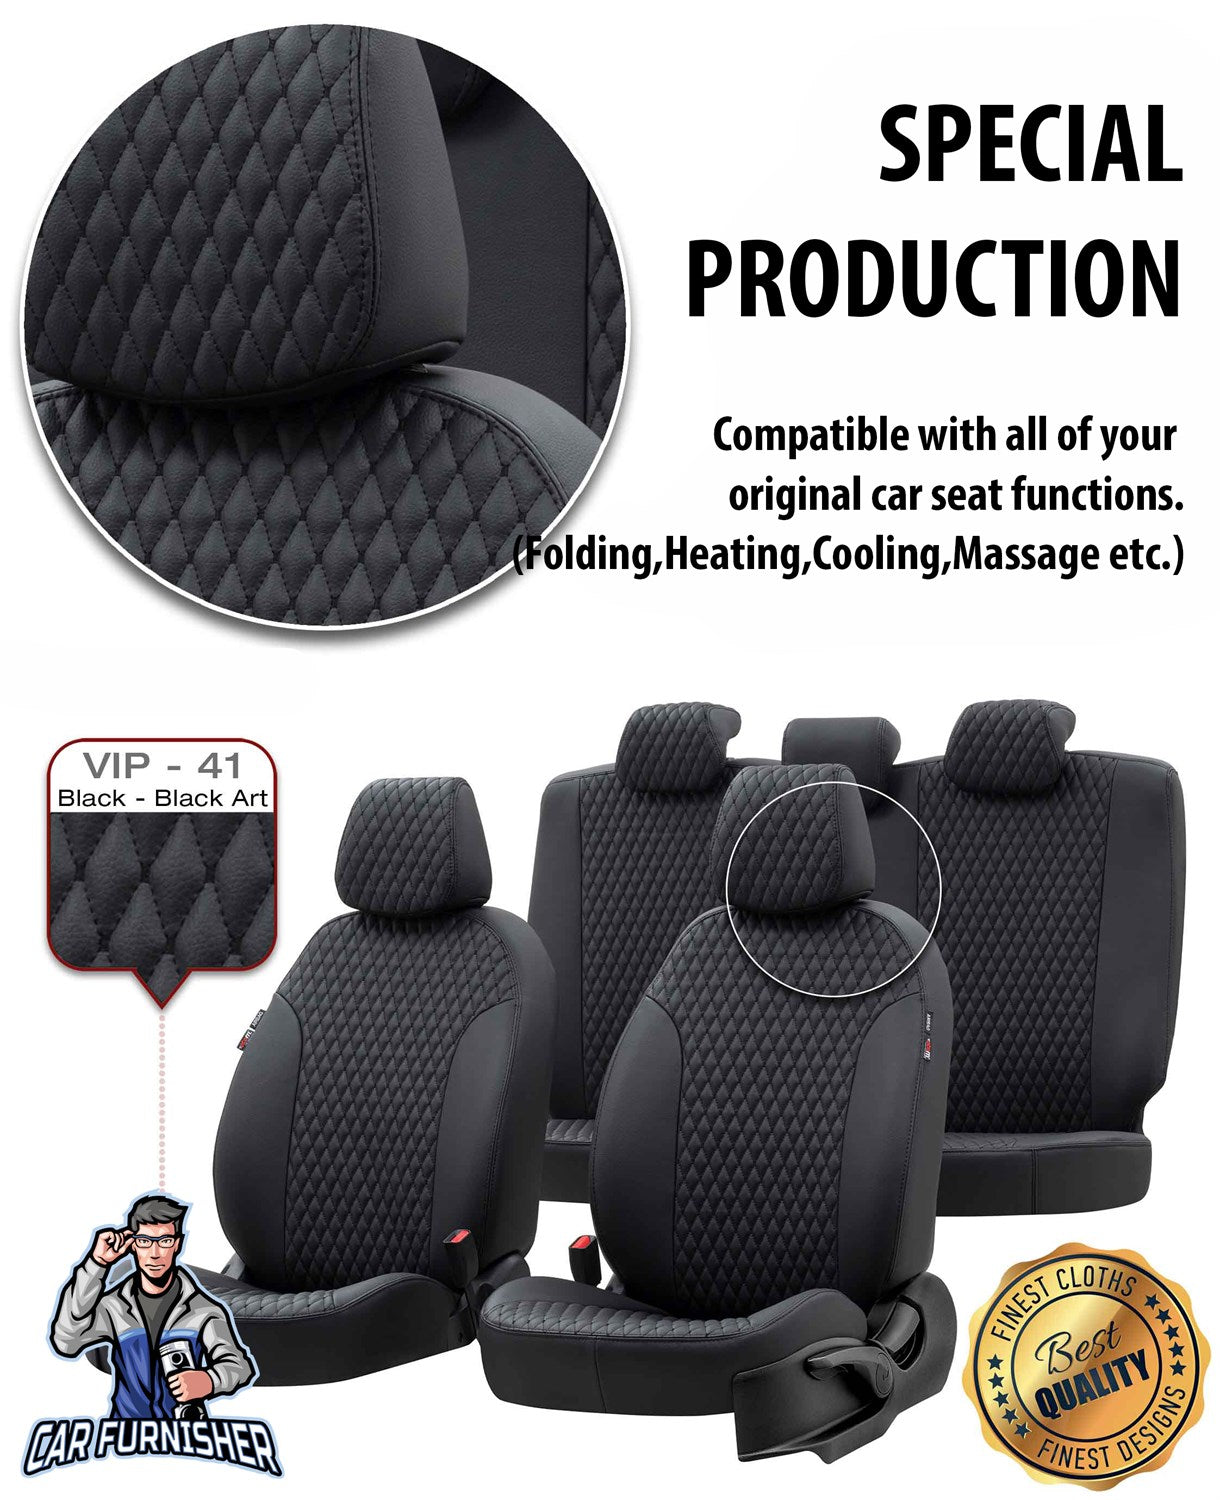 Mini Cooper Seat Covers Amsterdam Leather Design Smoked Black Leather